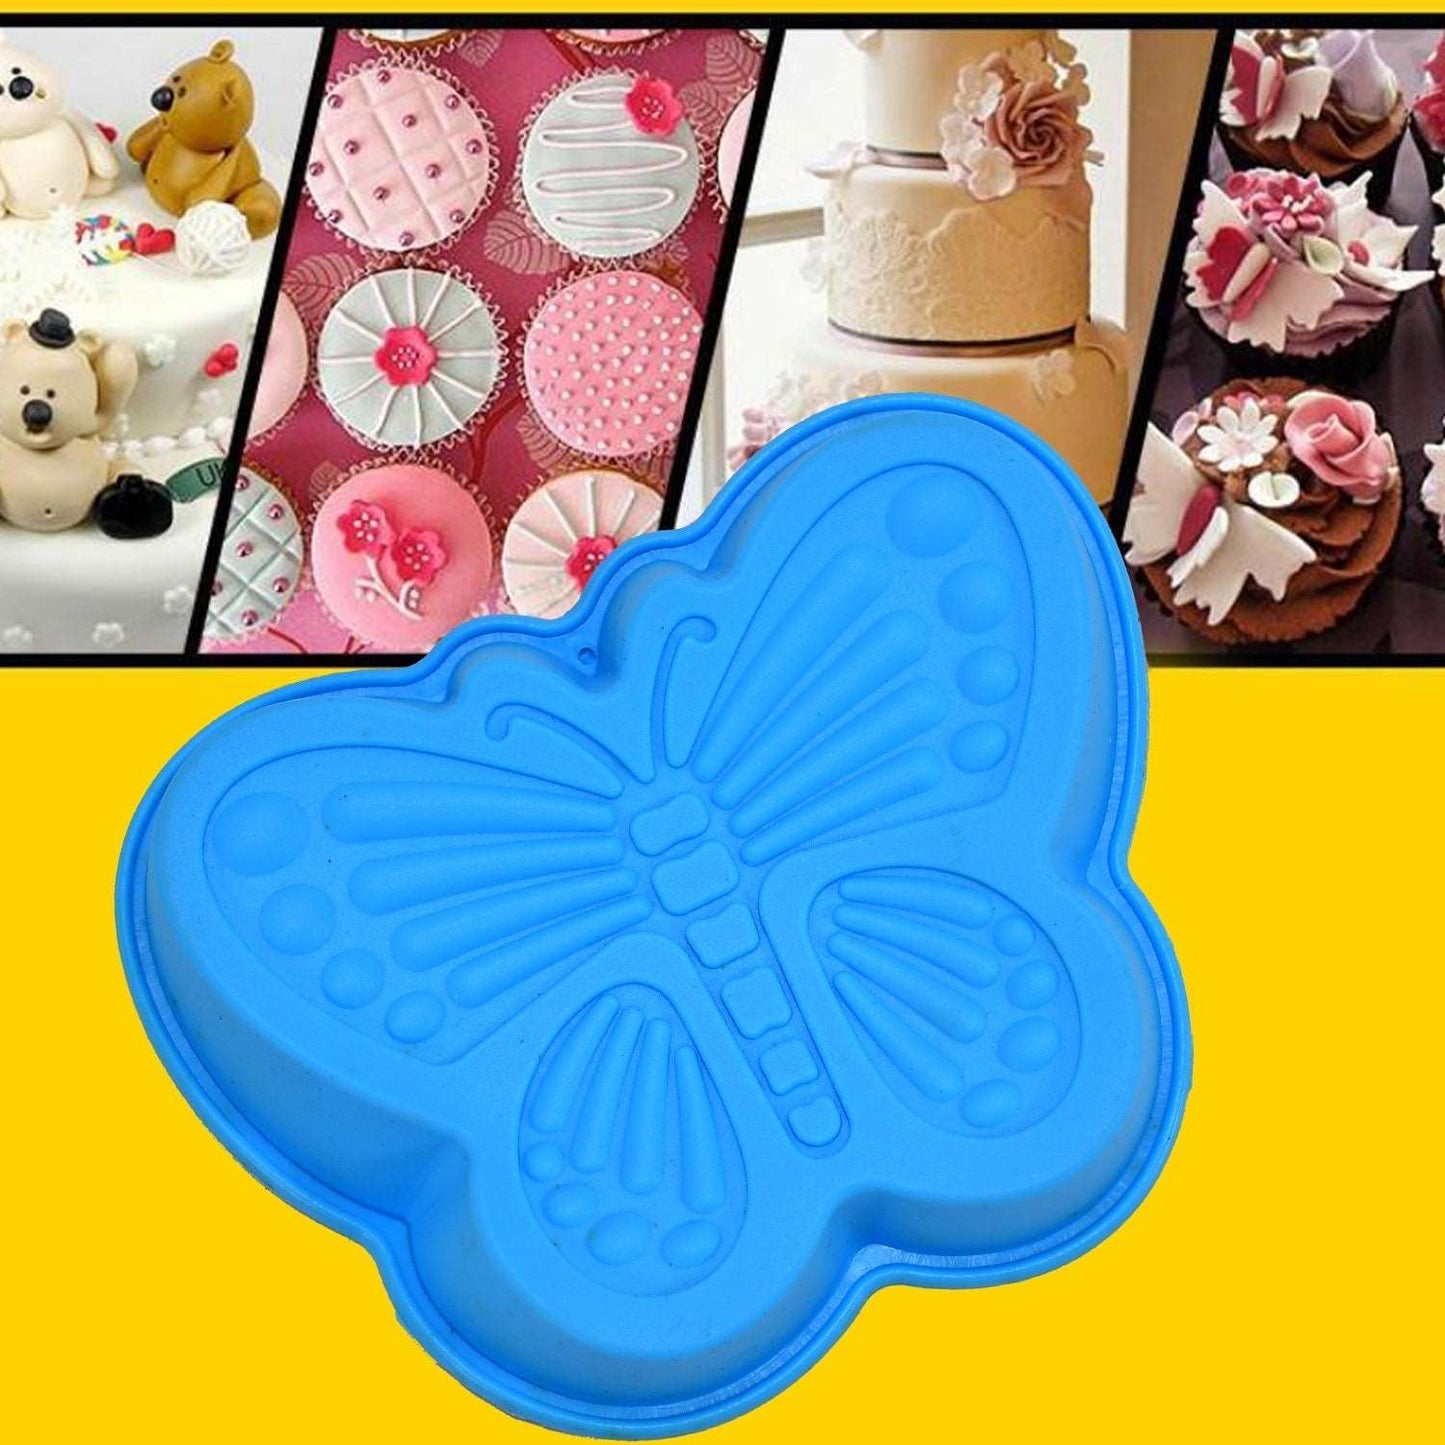 Butterfly Shape Cake Cup Liners I Silicone Baking Cups I Muffin Cupcake Cases I Microwave or Oven Tray Safe I Molds for Handmade Soap, Biscuit, Chocolate, Muffins, Jelly – Pack of 4